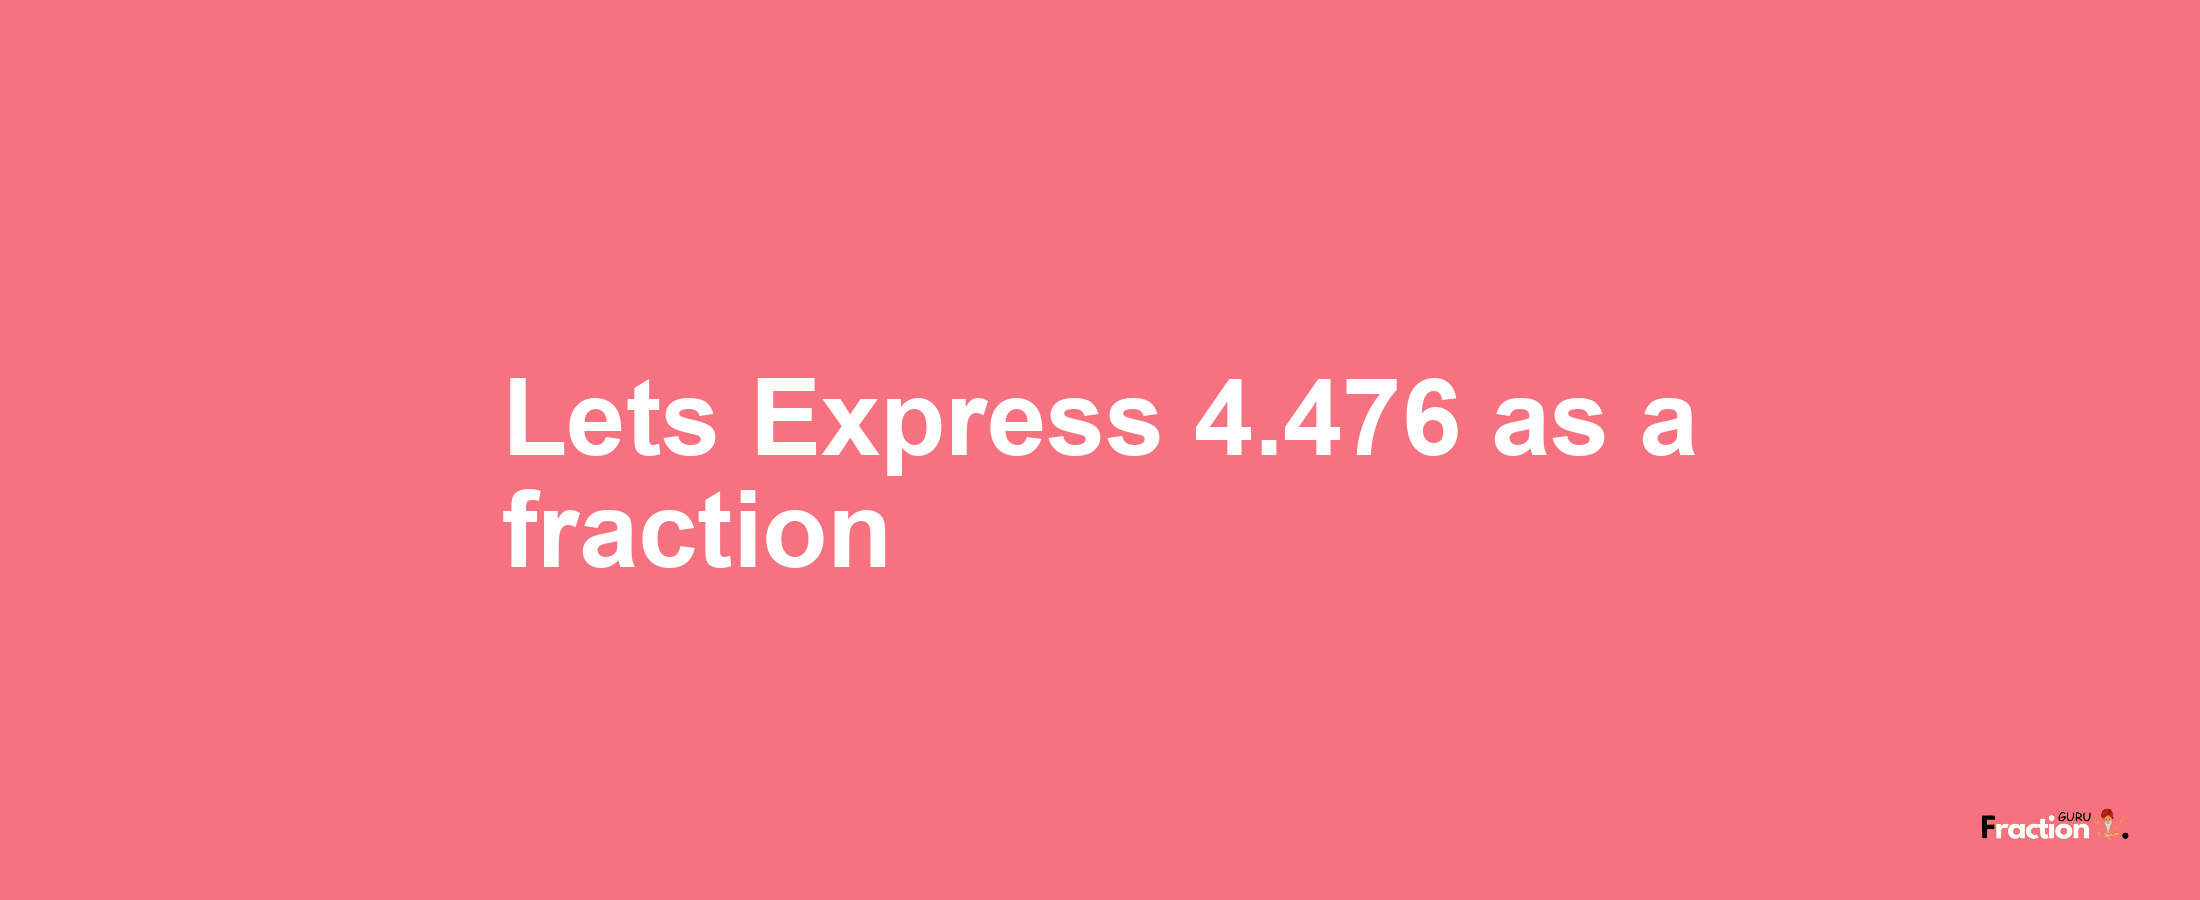 Lets Express 4.476 as afraction